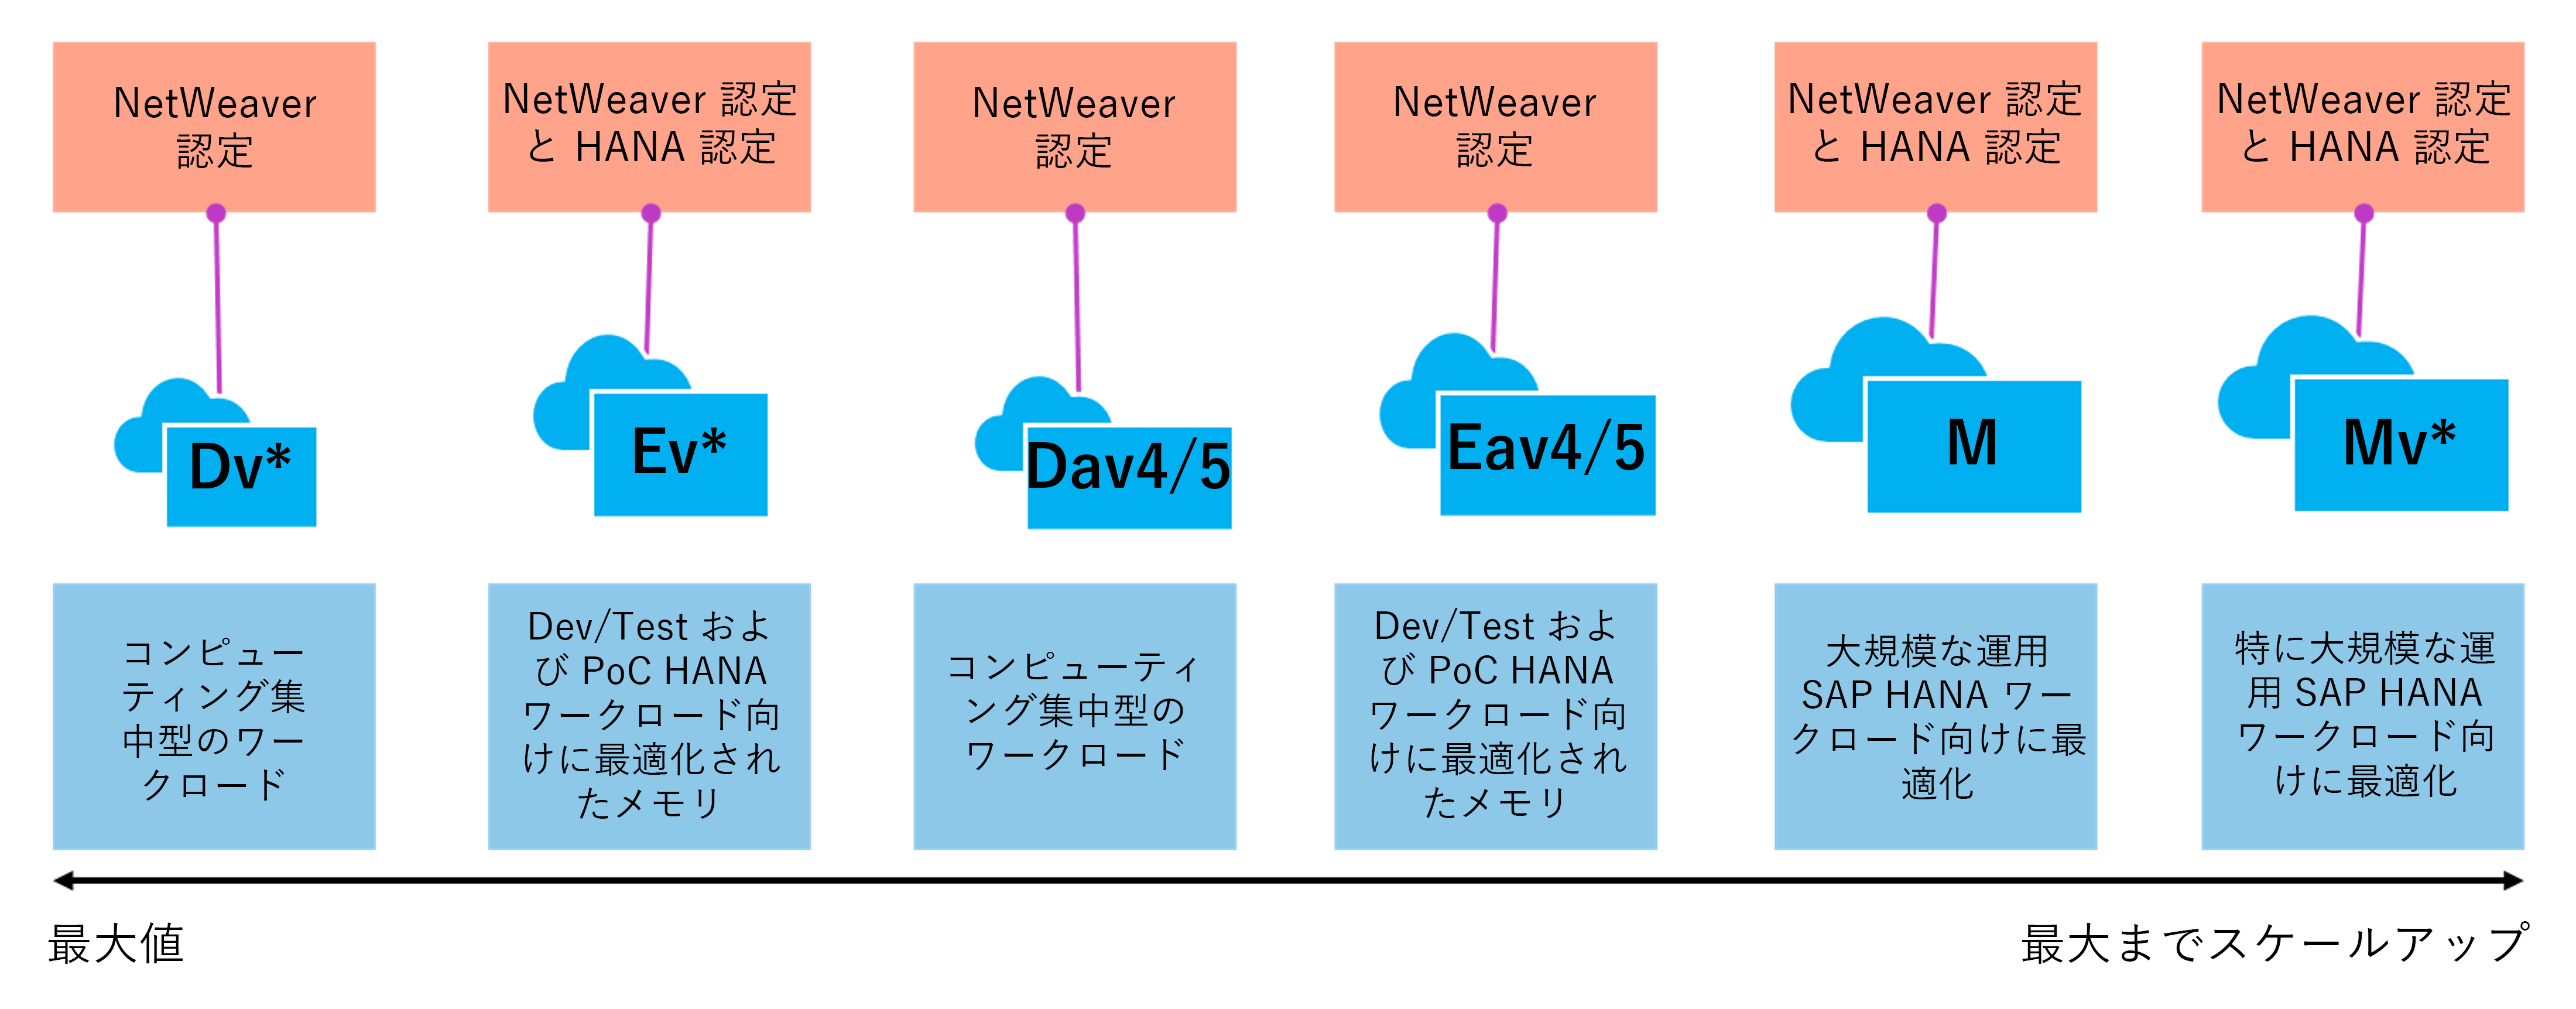 Diagram of deployment options for S A P on Azure.